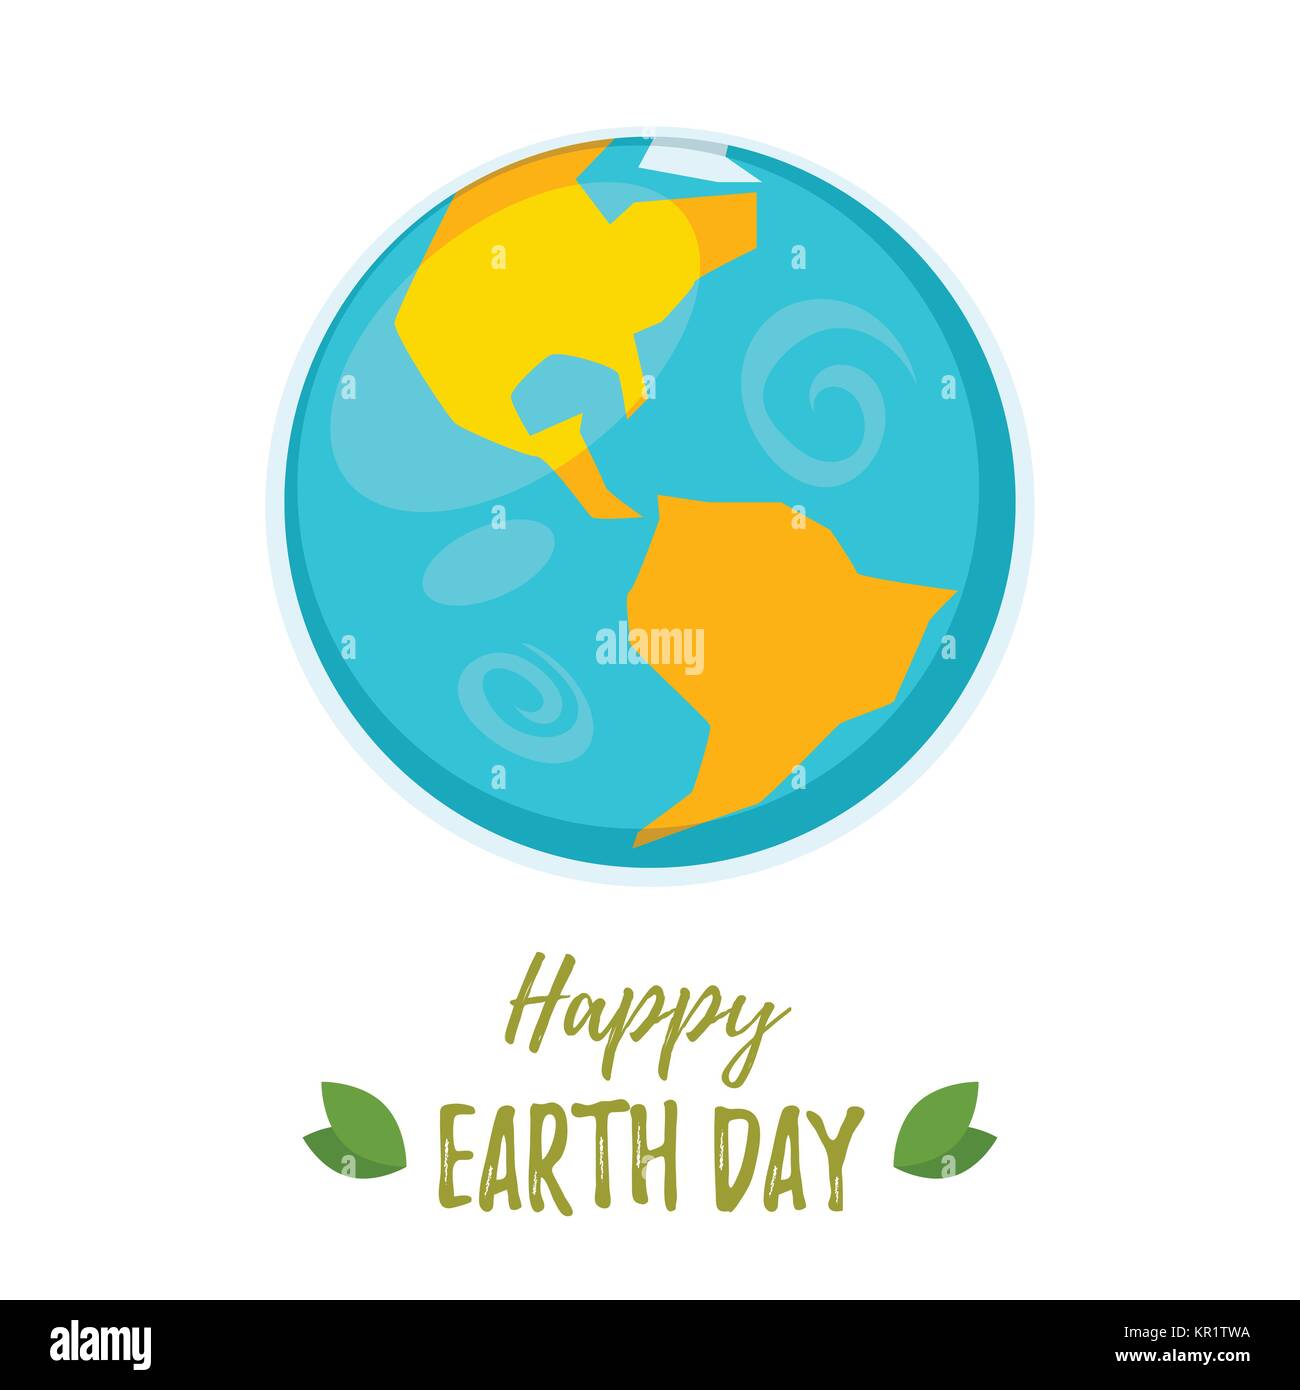 Earth Day greeting card Stock Vector